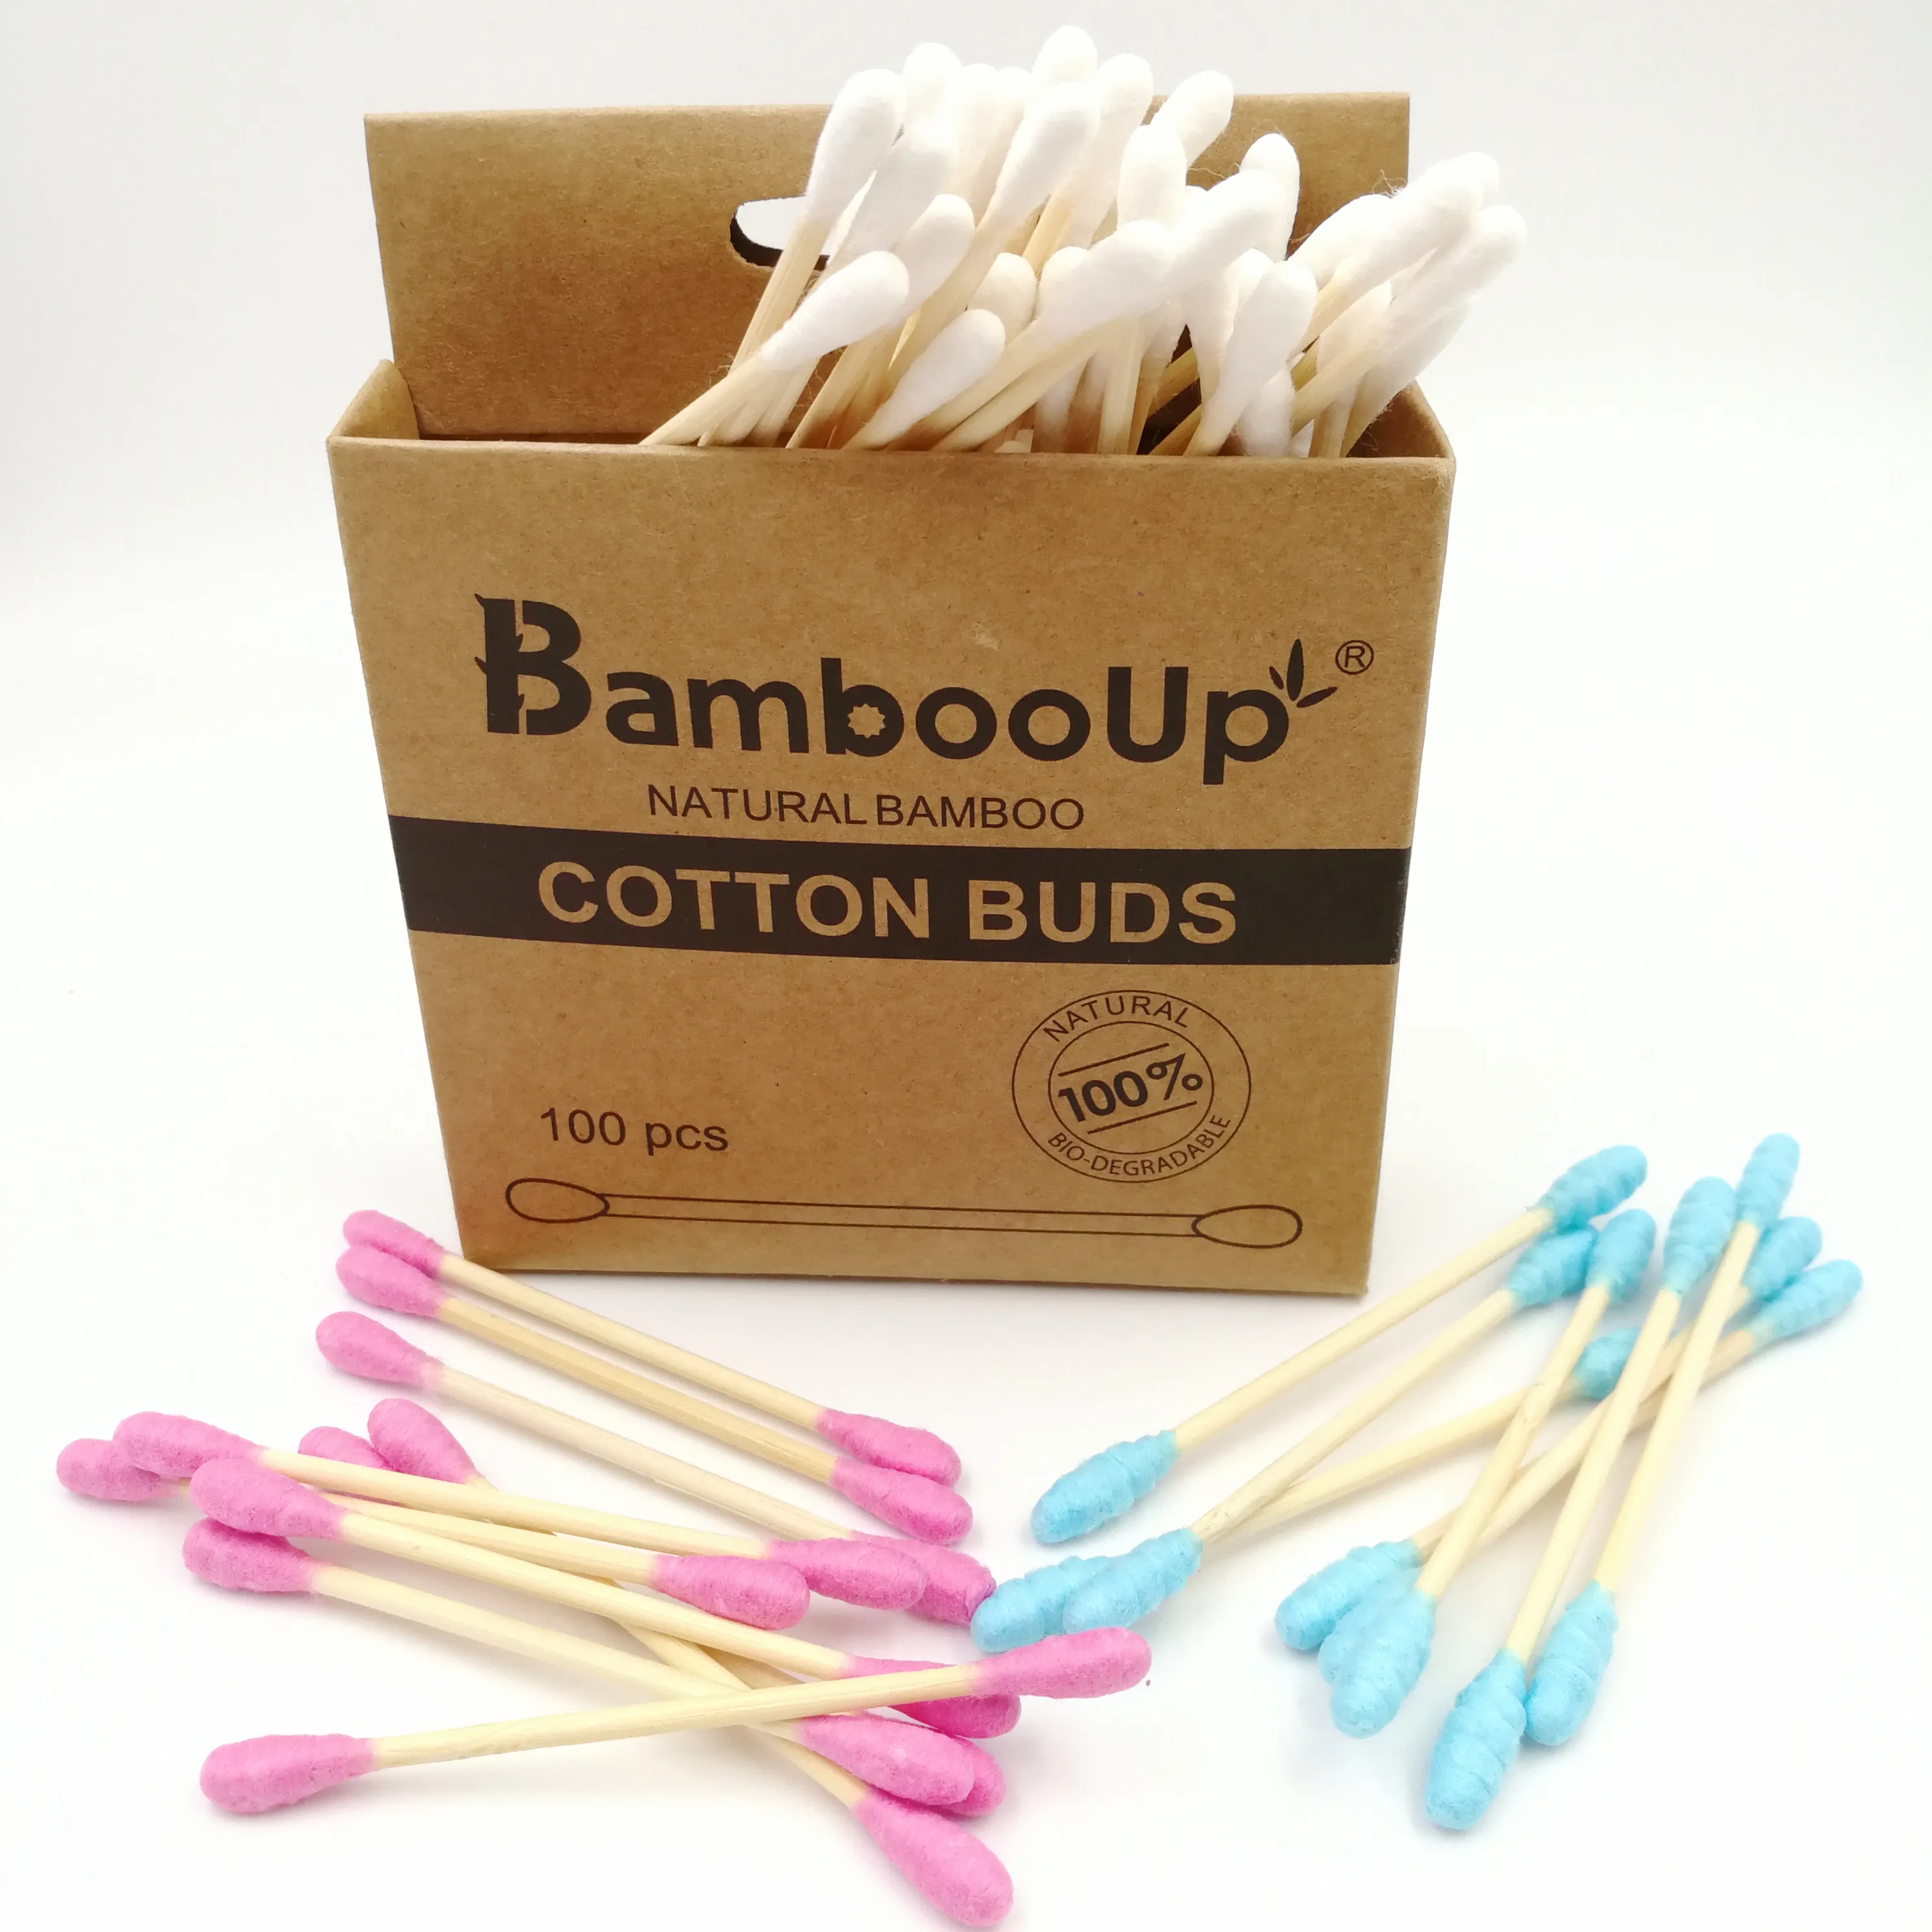 biodegradable-natural bamboo cotton buds swab ear cleaning cotton buds